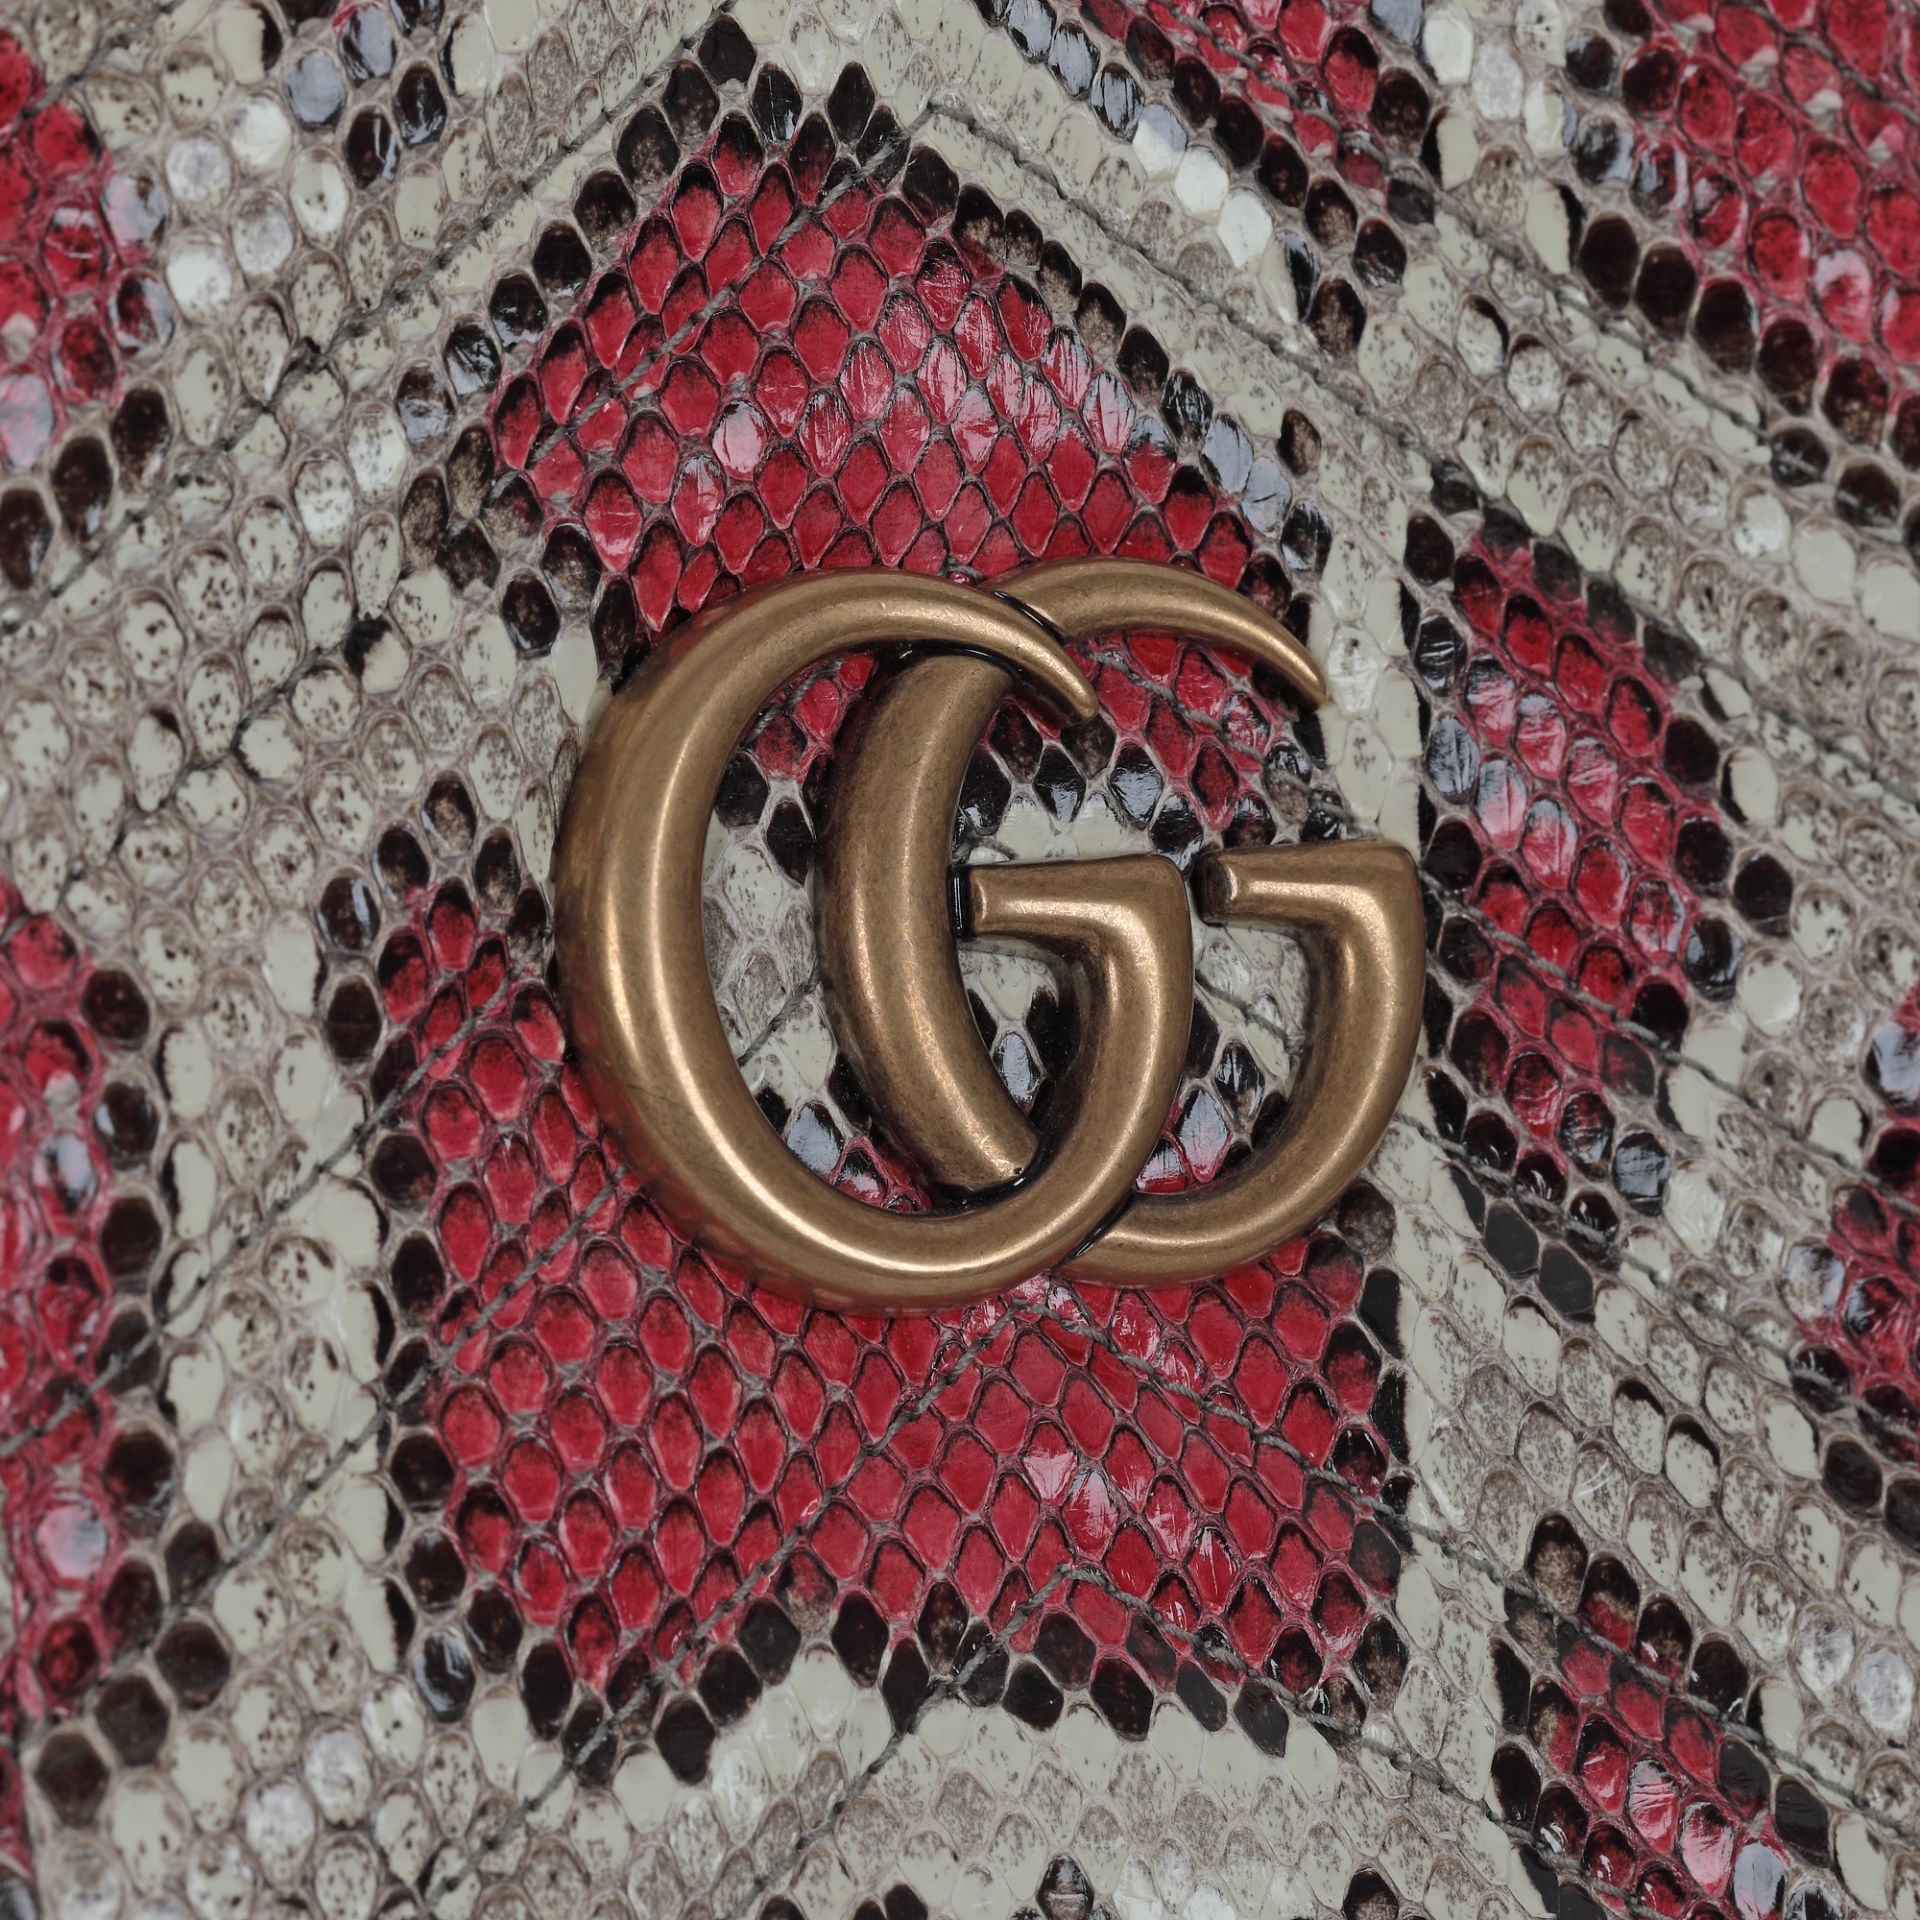 "Marmont Tote" - Gucci bag, python leather - Image 2 of 3